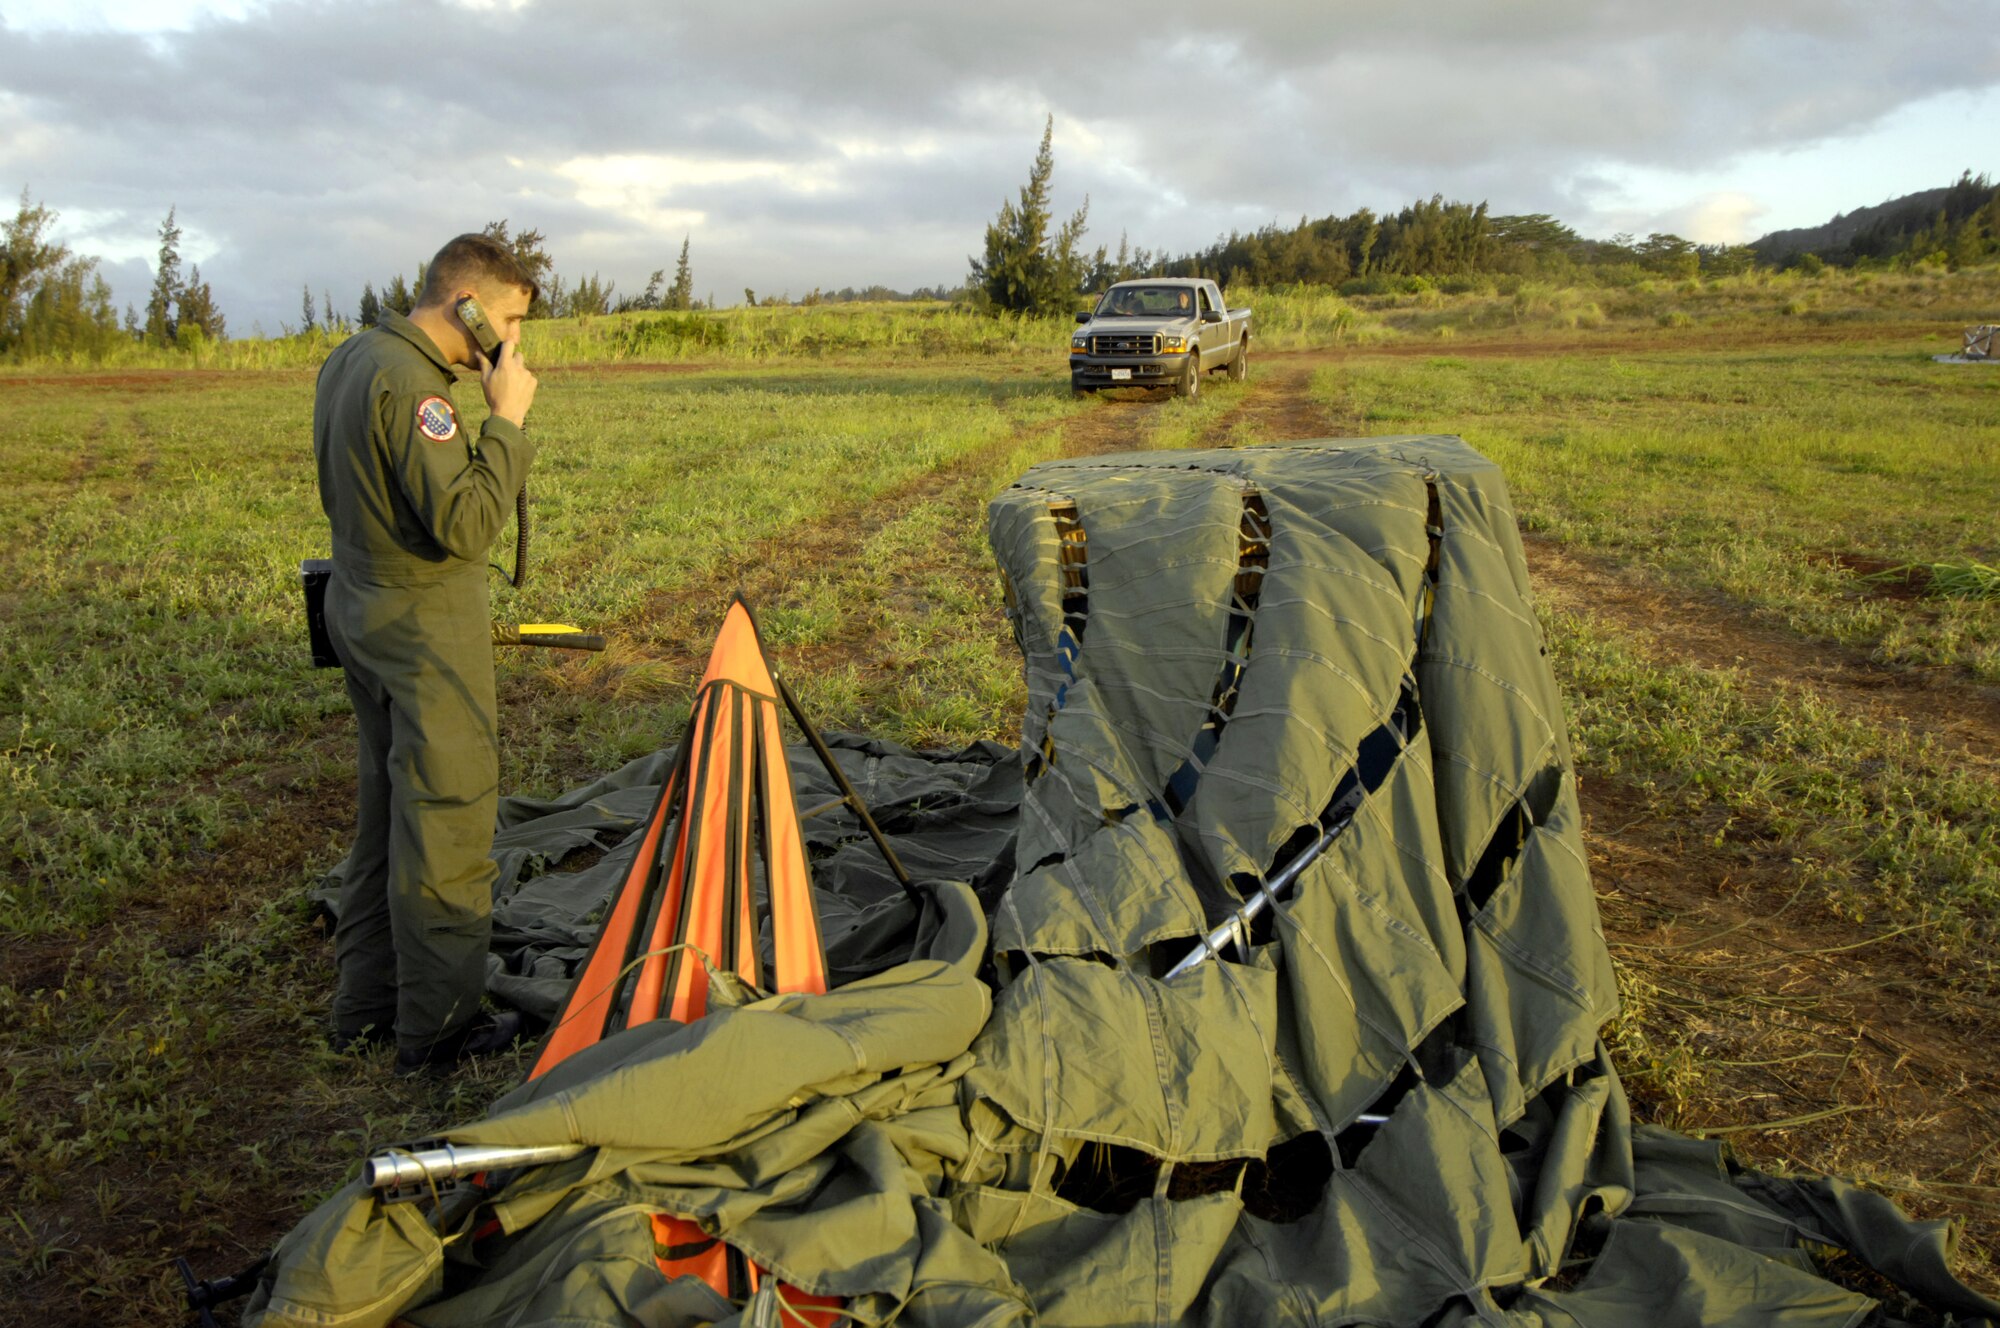 Tech. Sgt. Ken Bragg relays the landing position of a practice bundle to pilots of a C-17 Globemaster III during quarterly airdrop qualification at the Kahuku Training Range in Hawaii Monday. Sergeant Bragg is a loadmaster and drop zone control officer with the 535th Airlift Squadron, Hickam Air Force Base, Hawaii. (U.S. Air Force photo/ Tech. Sgt. Shane A. Cuomo)